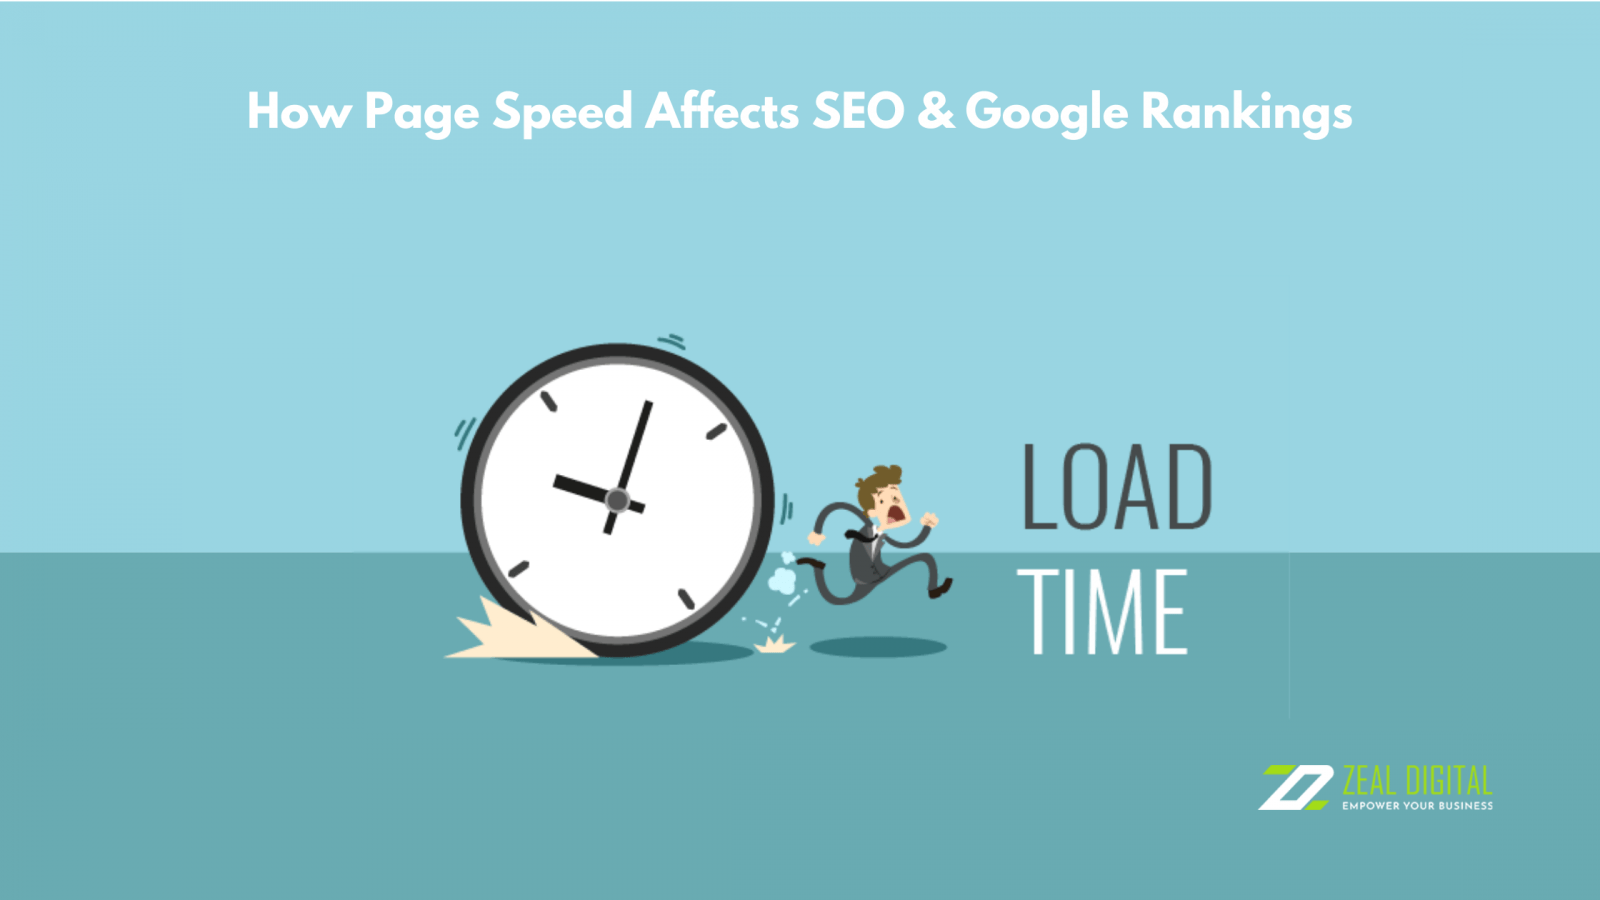 Moreover, this tool has become more popular among SEO professionals through Page Speed Insights, which Lighthouse owned. Still, it delivers the information in a simple and effortless format on a web page.